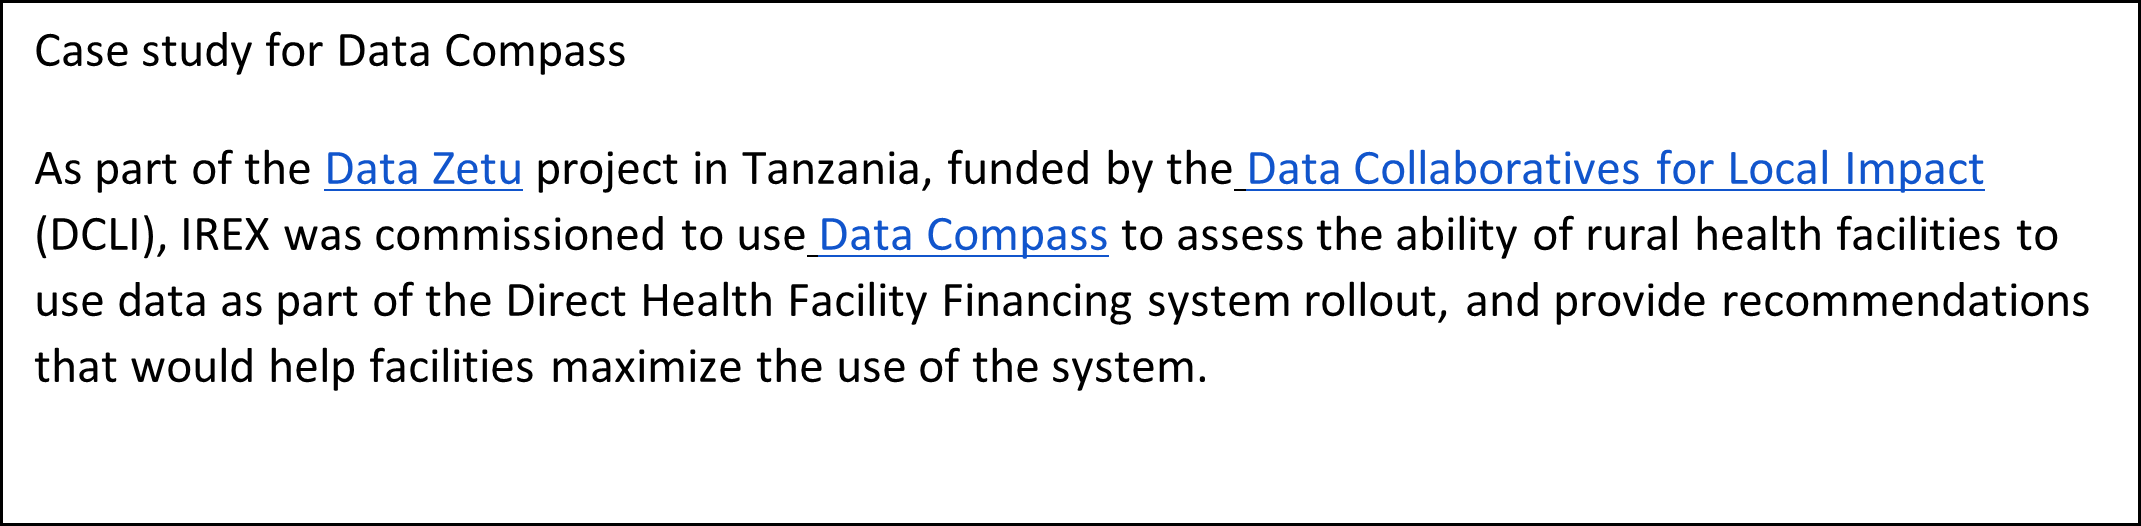 As part of the Data Zetu project in Tanzania, funded by the Data Collaboratives for Local Impact (DCLI), IREX was commissioned to use Data Compass to assess the ability of rural health facilities to use data as part of the Direct Health Facility Financing system rollout, and provide recommendations that would help facilities maximize the use of the system.